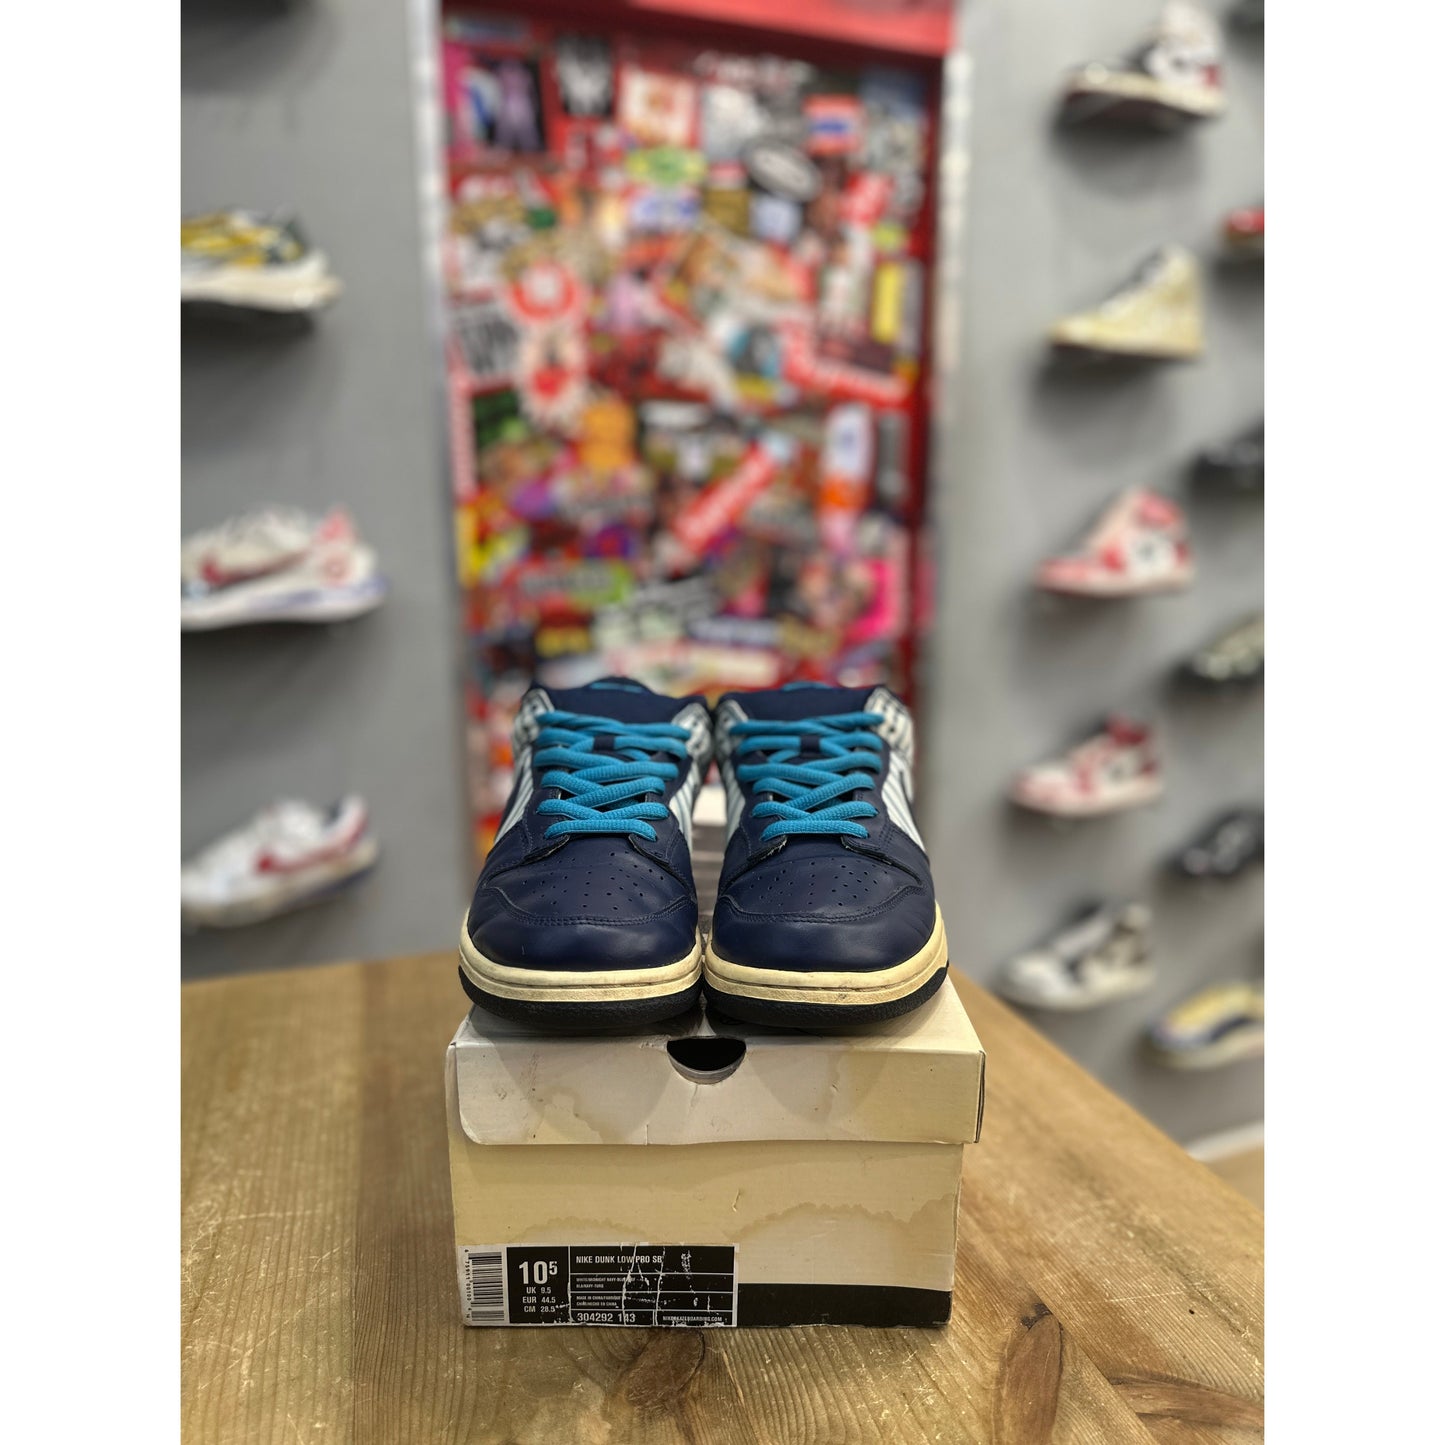 Nike SB Dunk Low Avenger Navy UK 9.5 by Nike from £150.00